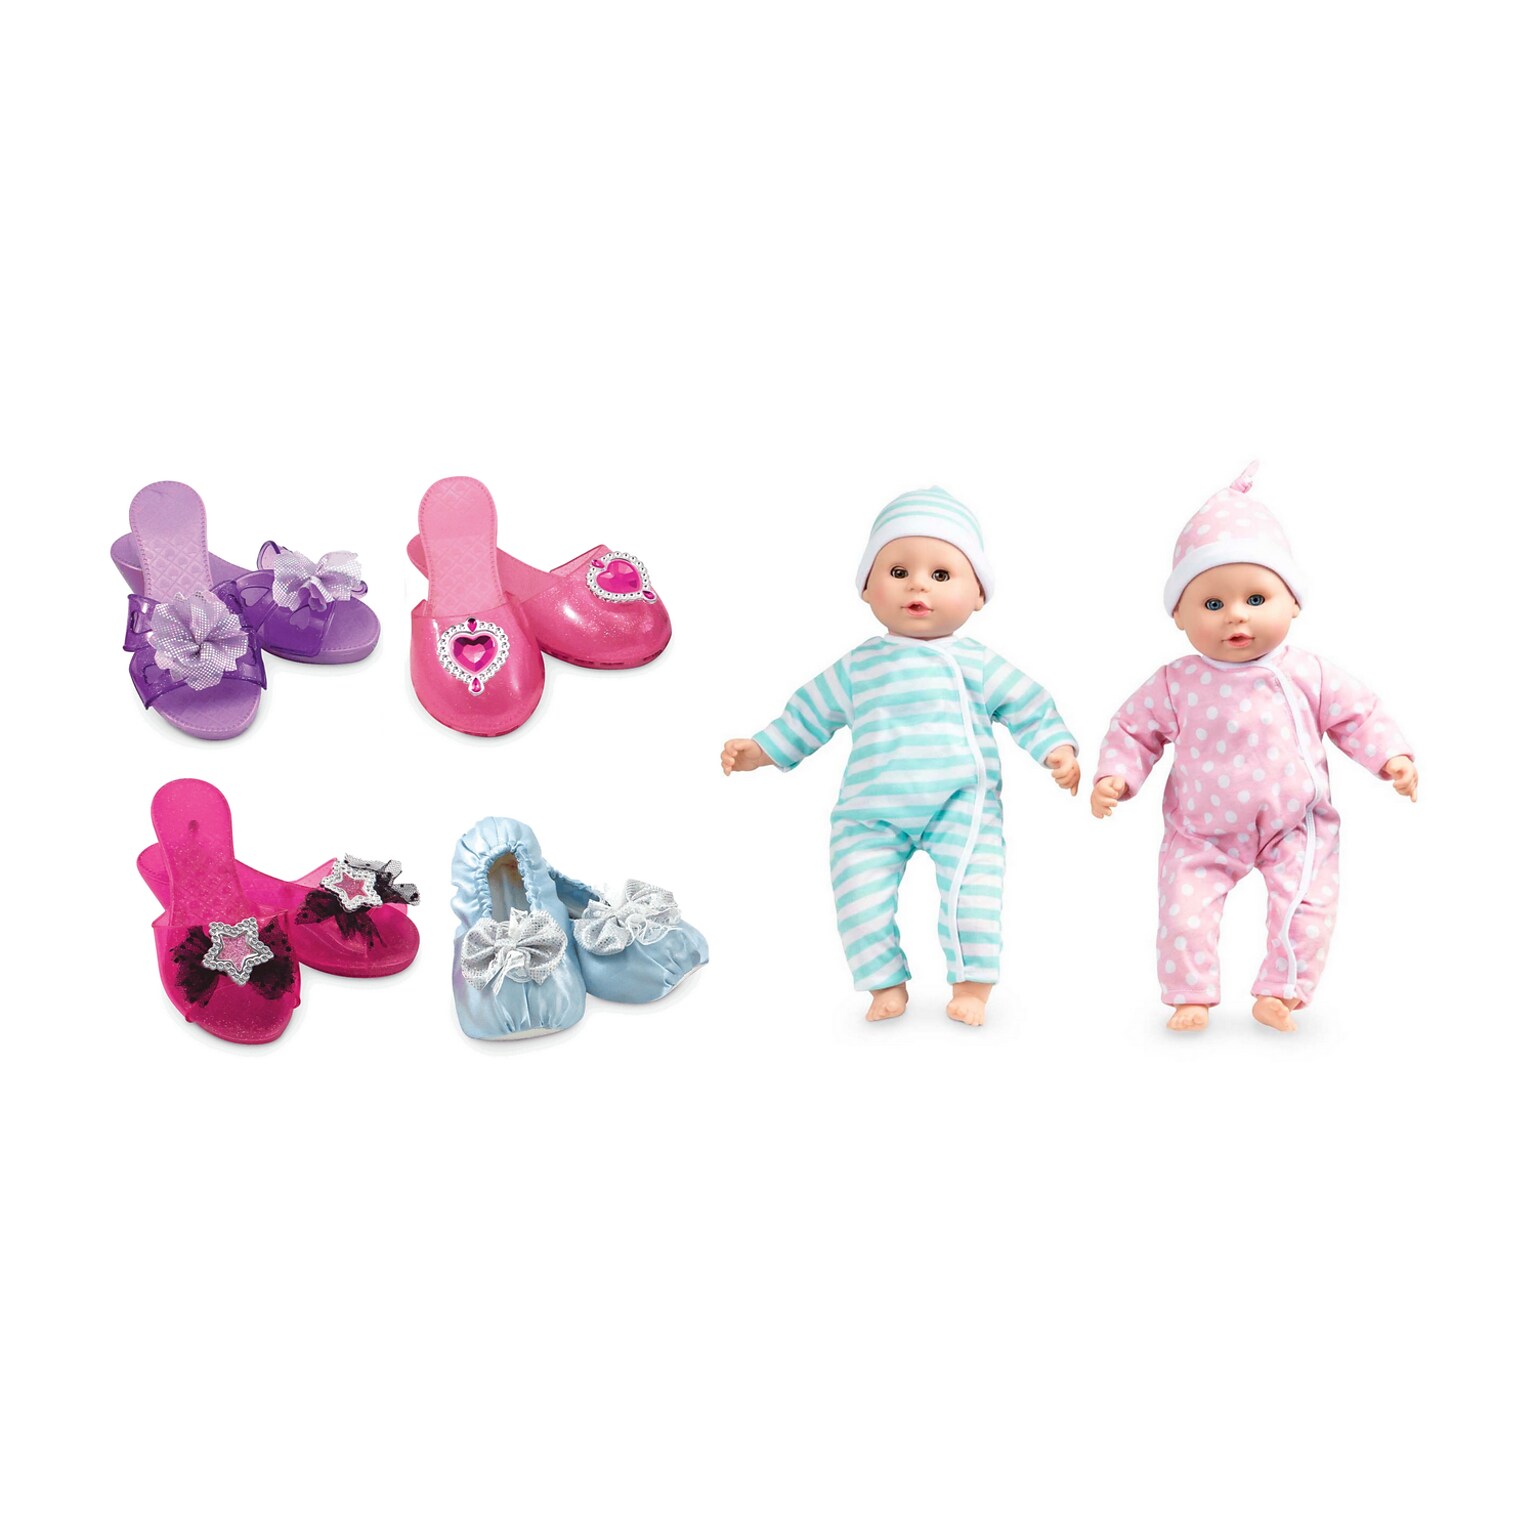 Mattel Dress-Up Shoes, Role Play Collection with Mine to Love, Luke & Lucy, Multicolored (8544-31711-KIT)